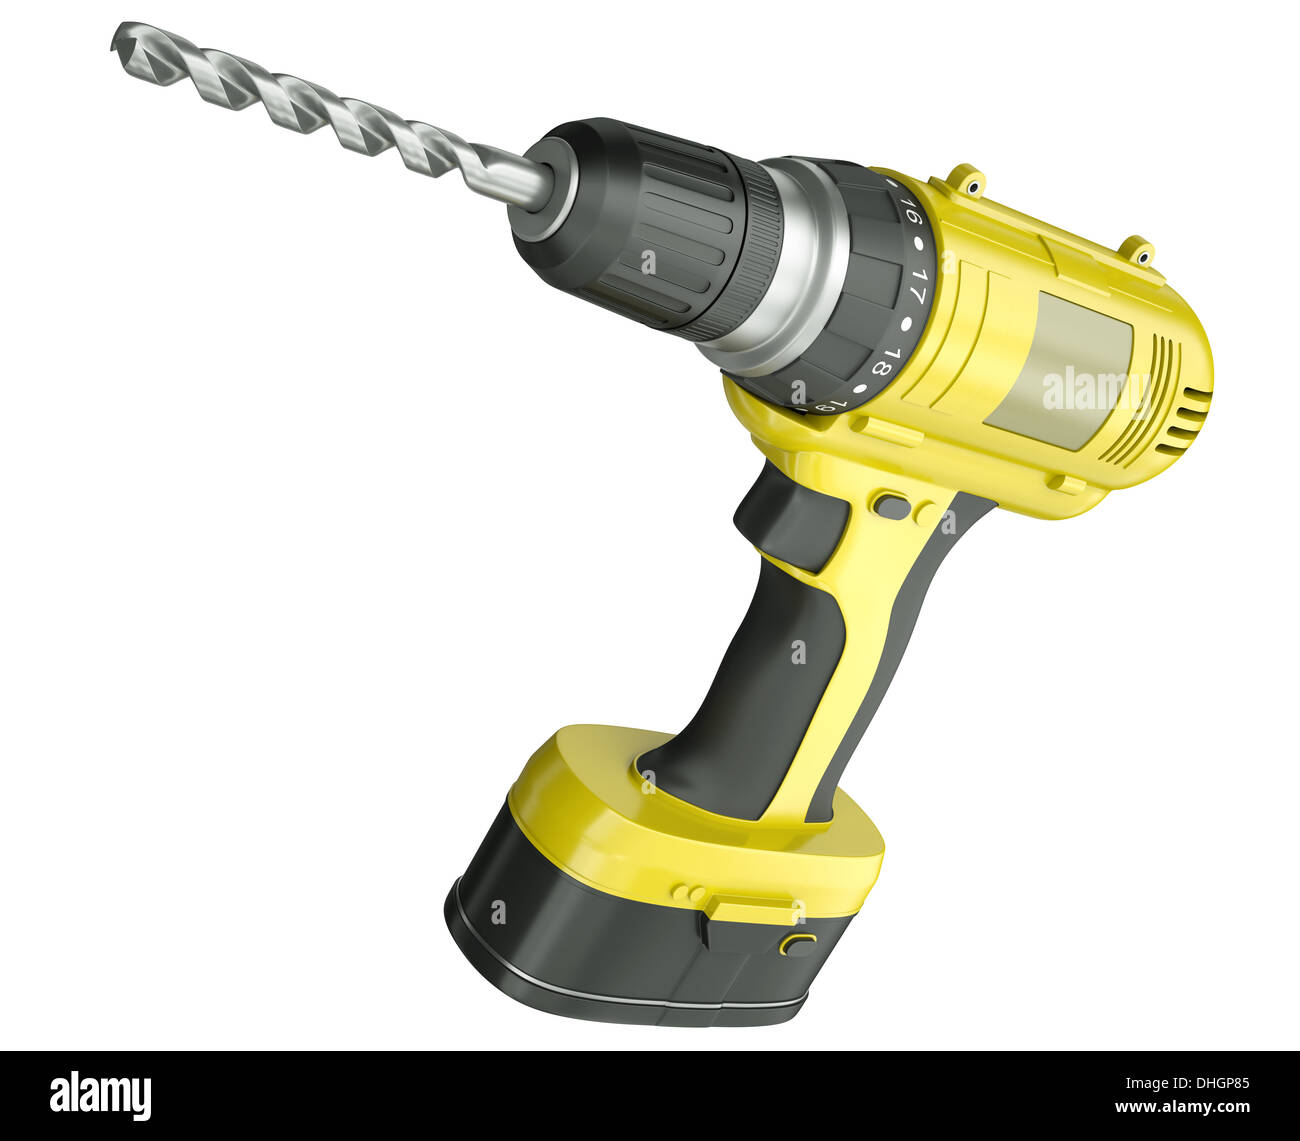 https://c8.alamy.com/comp/DHGP85/yellow-cordless-drill-isolated-on-a-white-background-3d-render-DHGP85.jpg